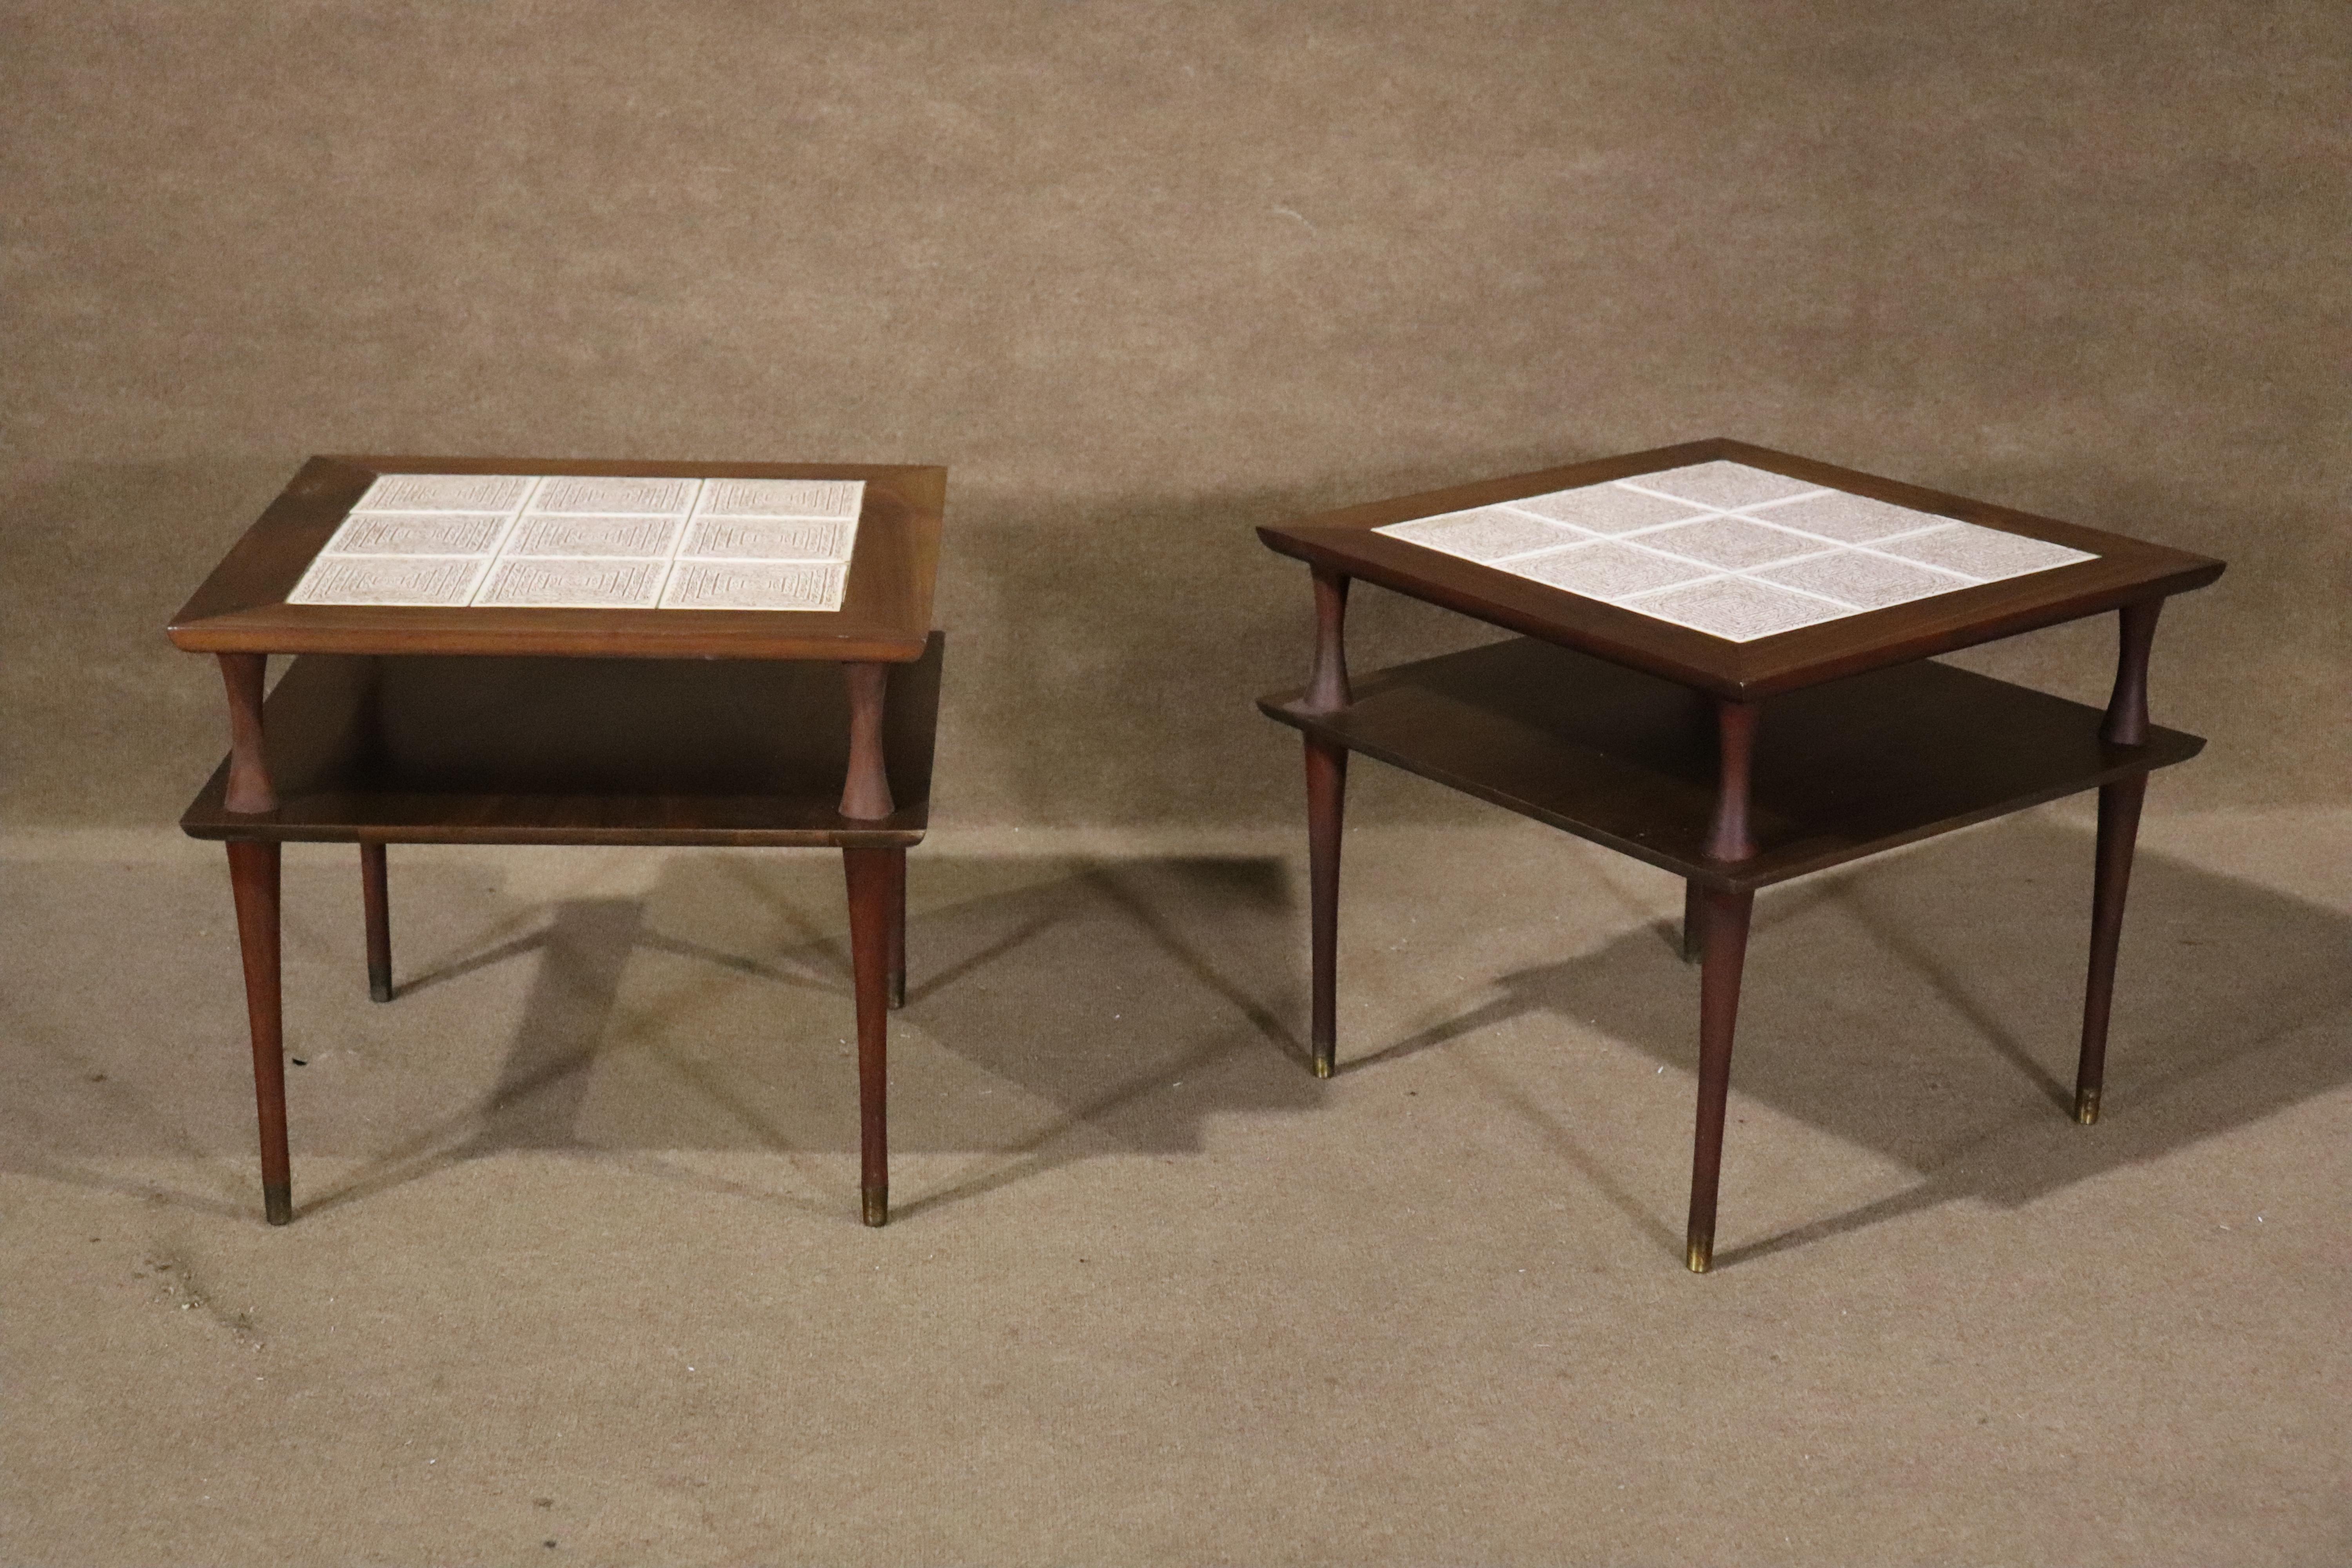 Pair of two tier side tables with patterned tile tops. Slender legs with brass tips, walnut grain throughout.
Please confirm location NY or NJ